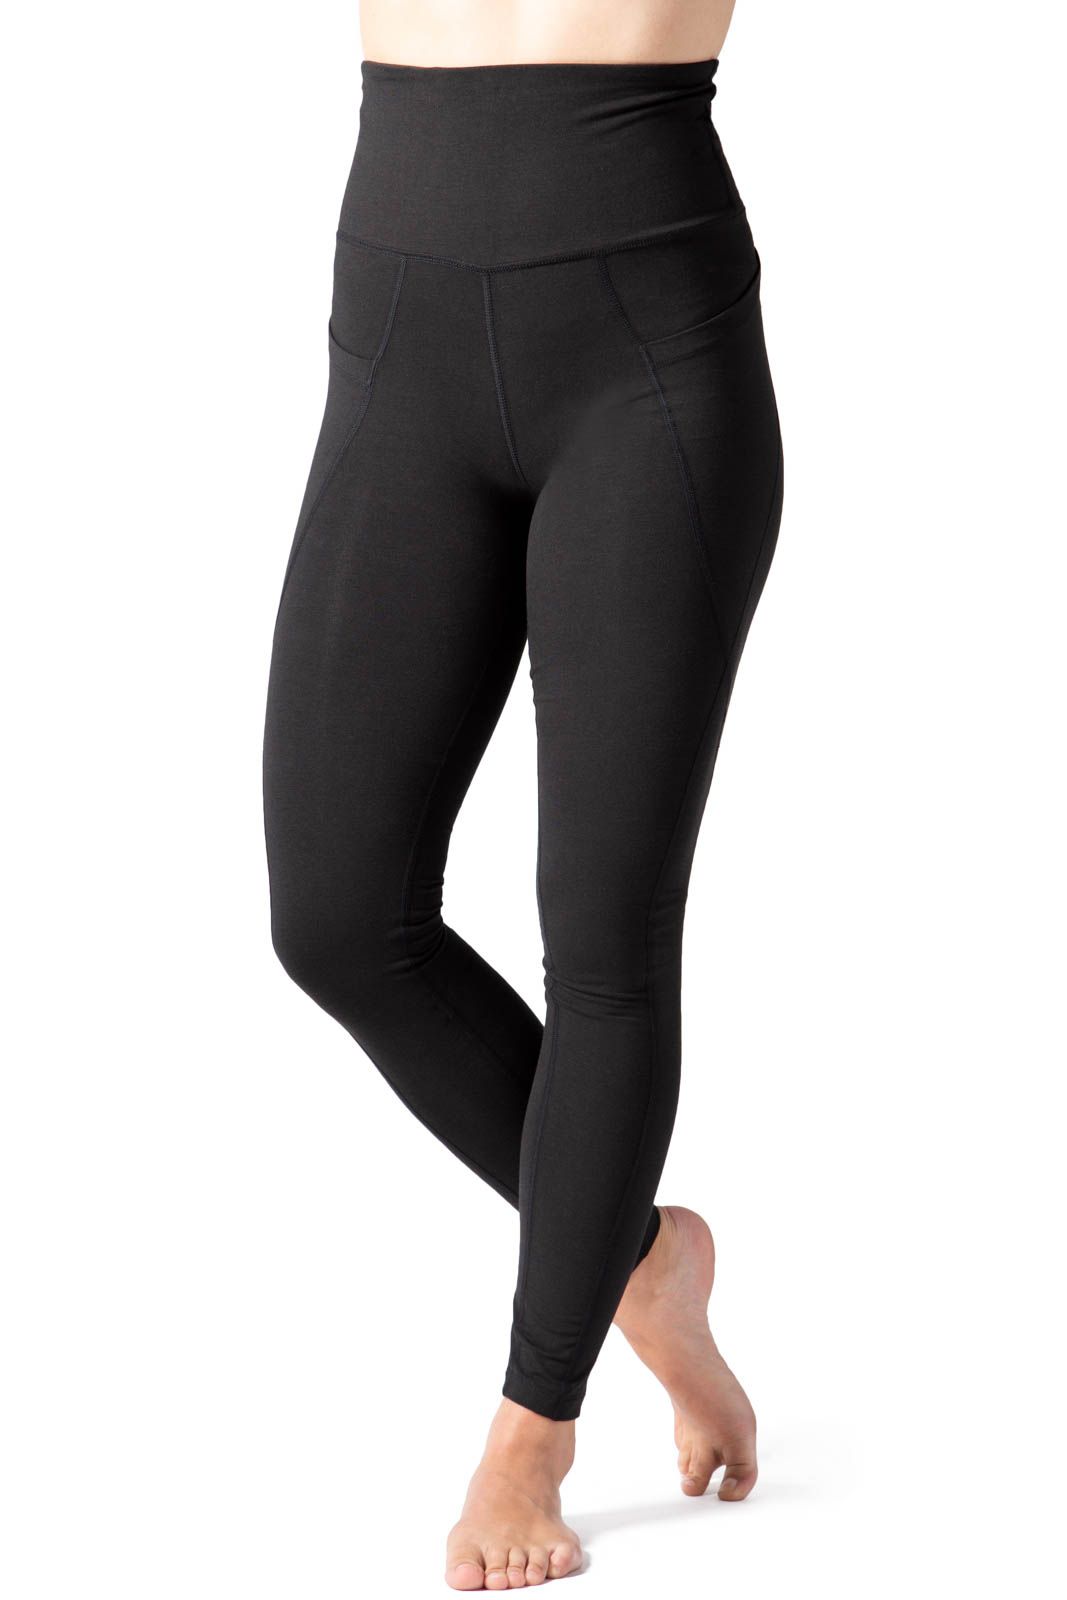 Womens Activewear, Workout Legging with Side Pockets